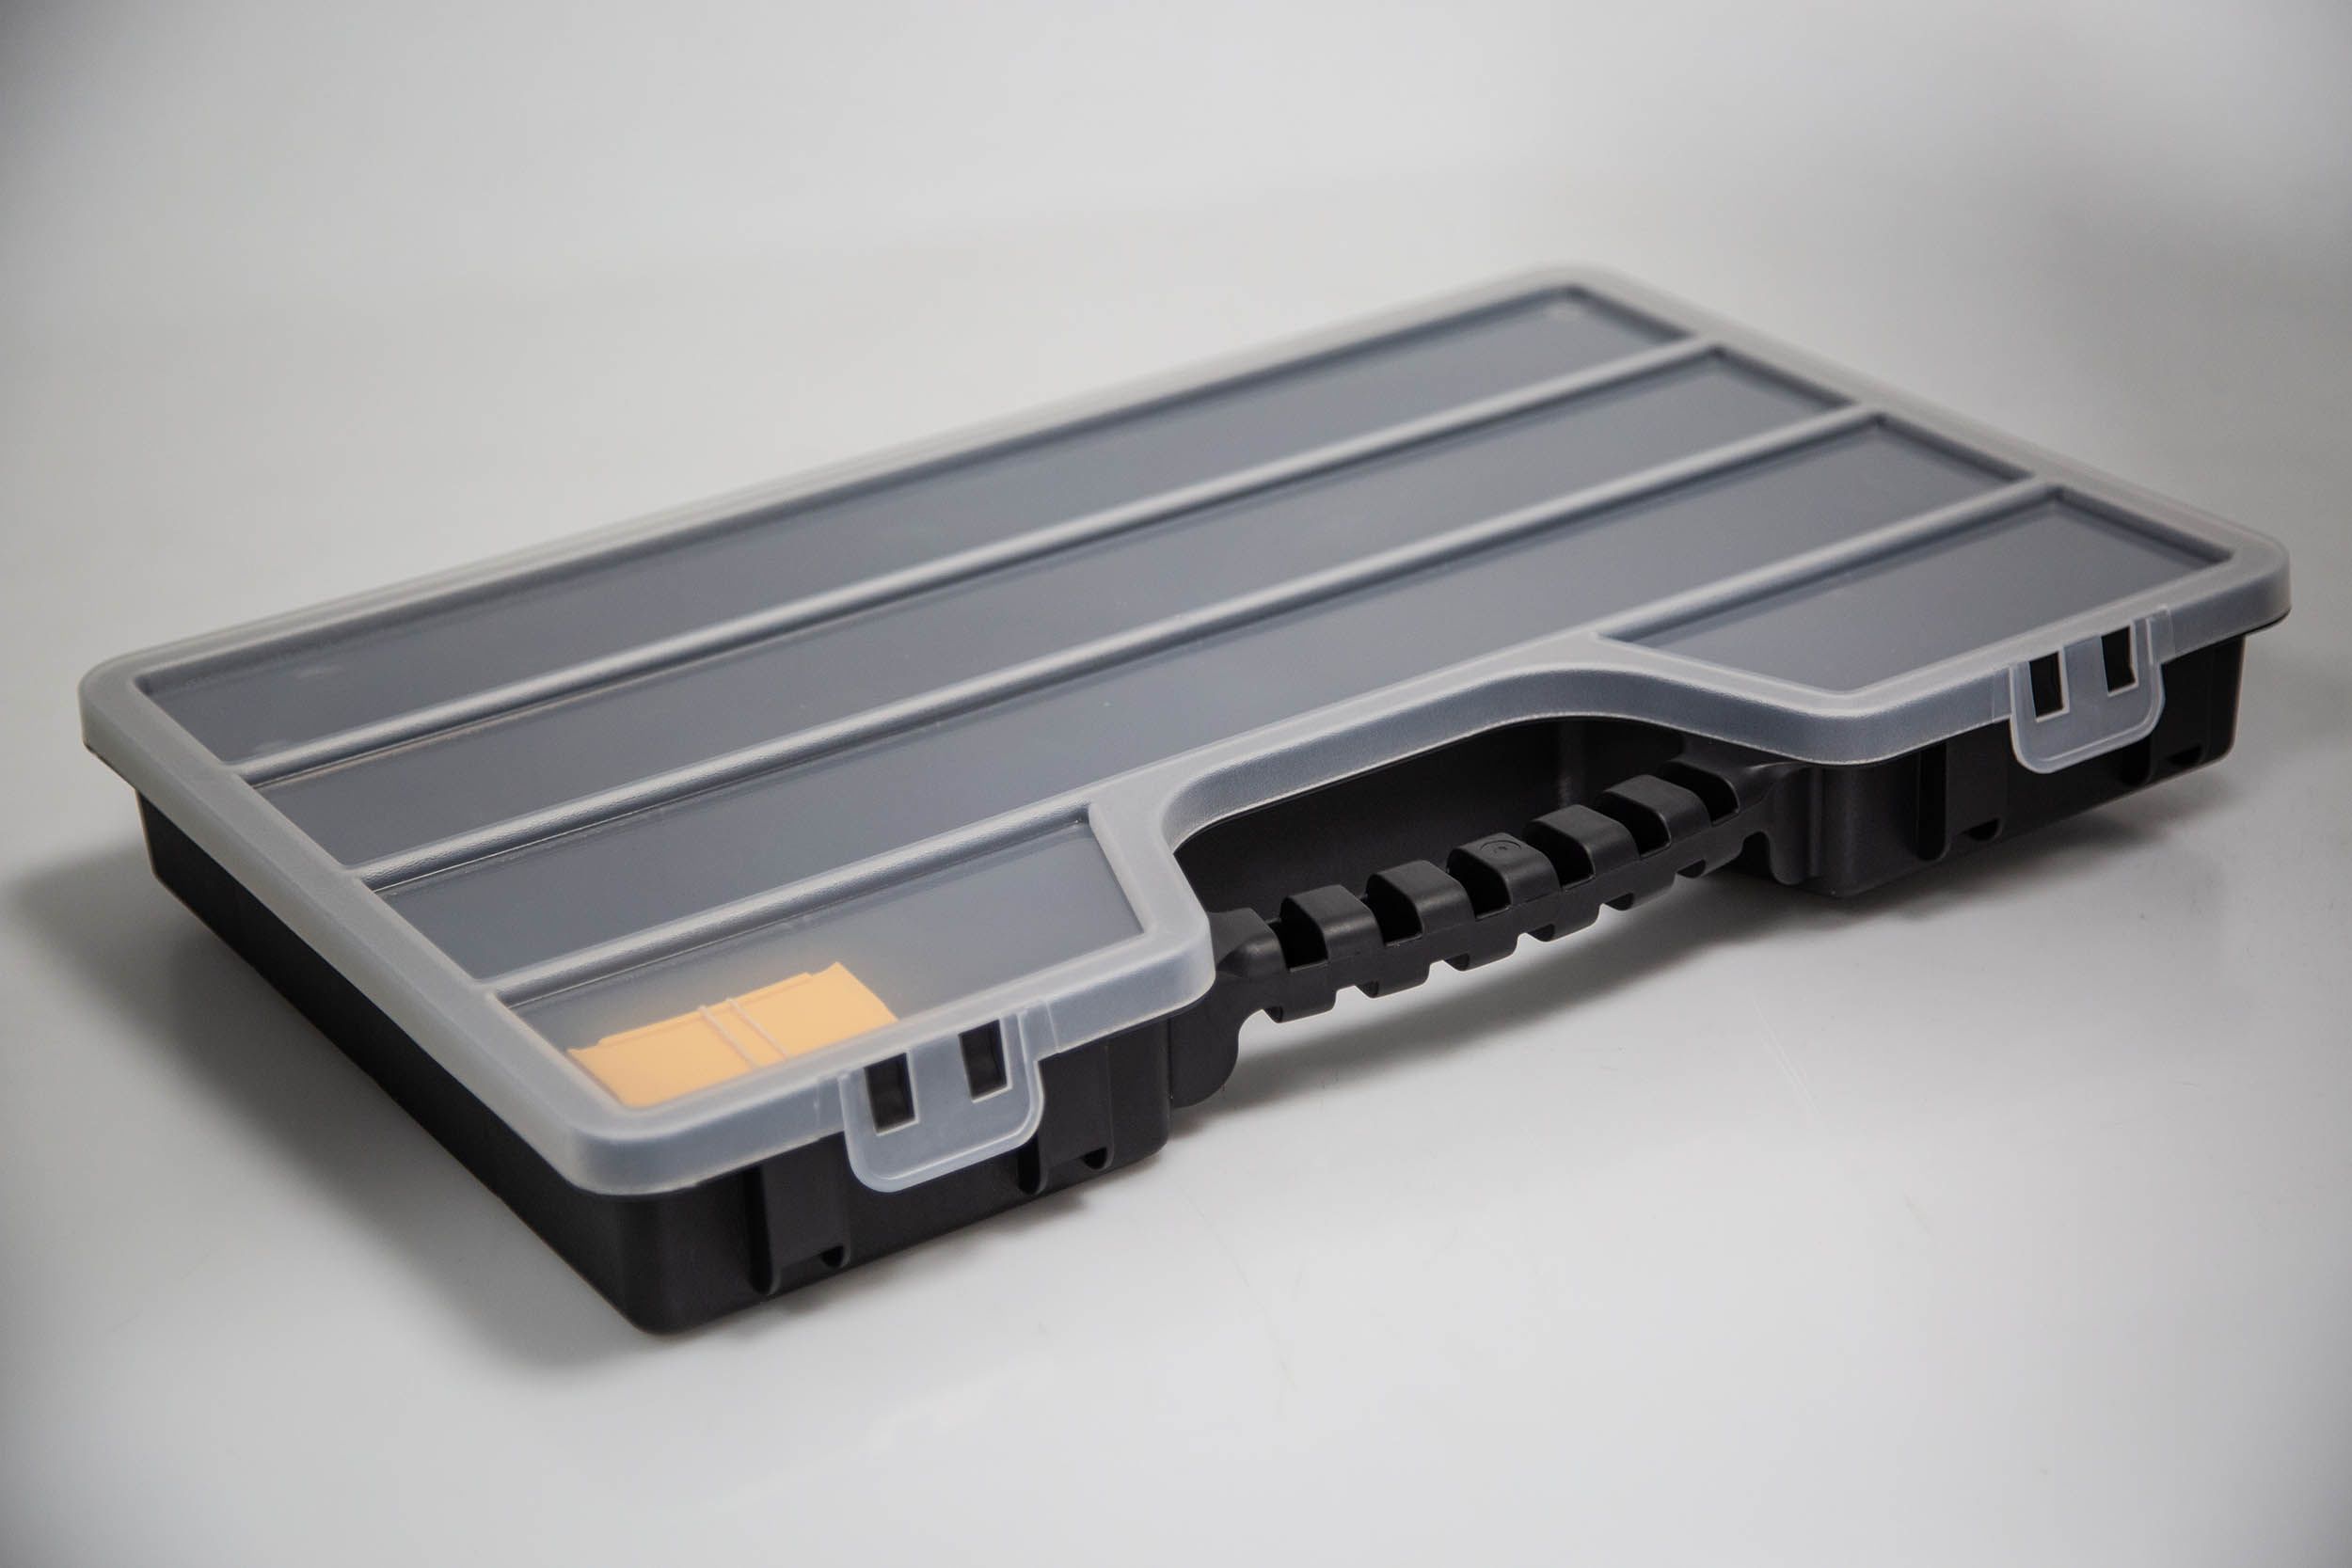 RS PRO 17 Cell Black, Transparent PP, Adjustable Compartment Box, 60mm x 510mm x 330mm